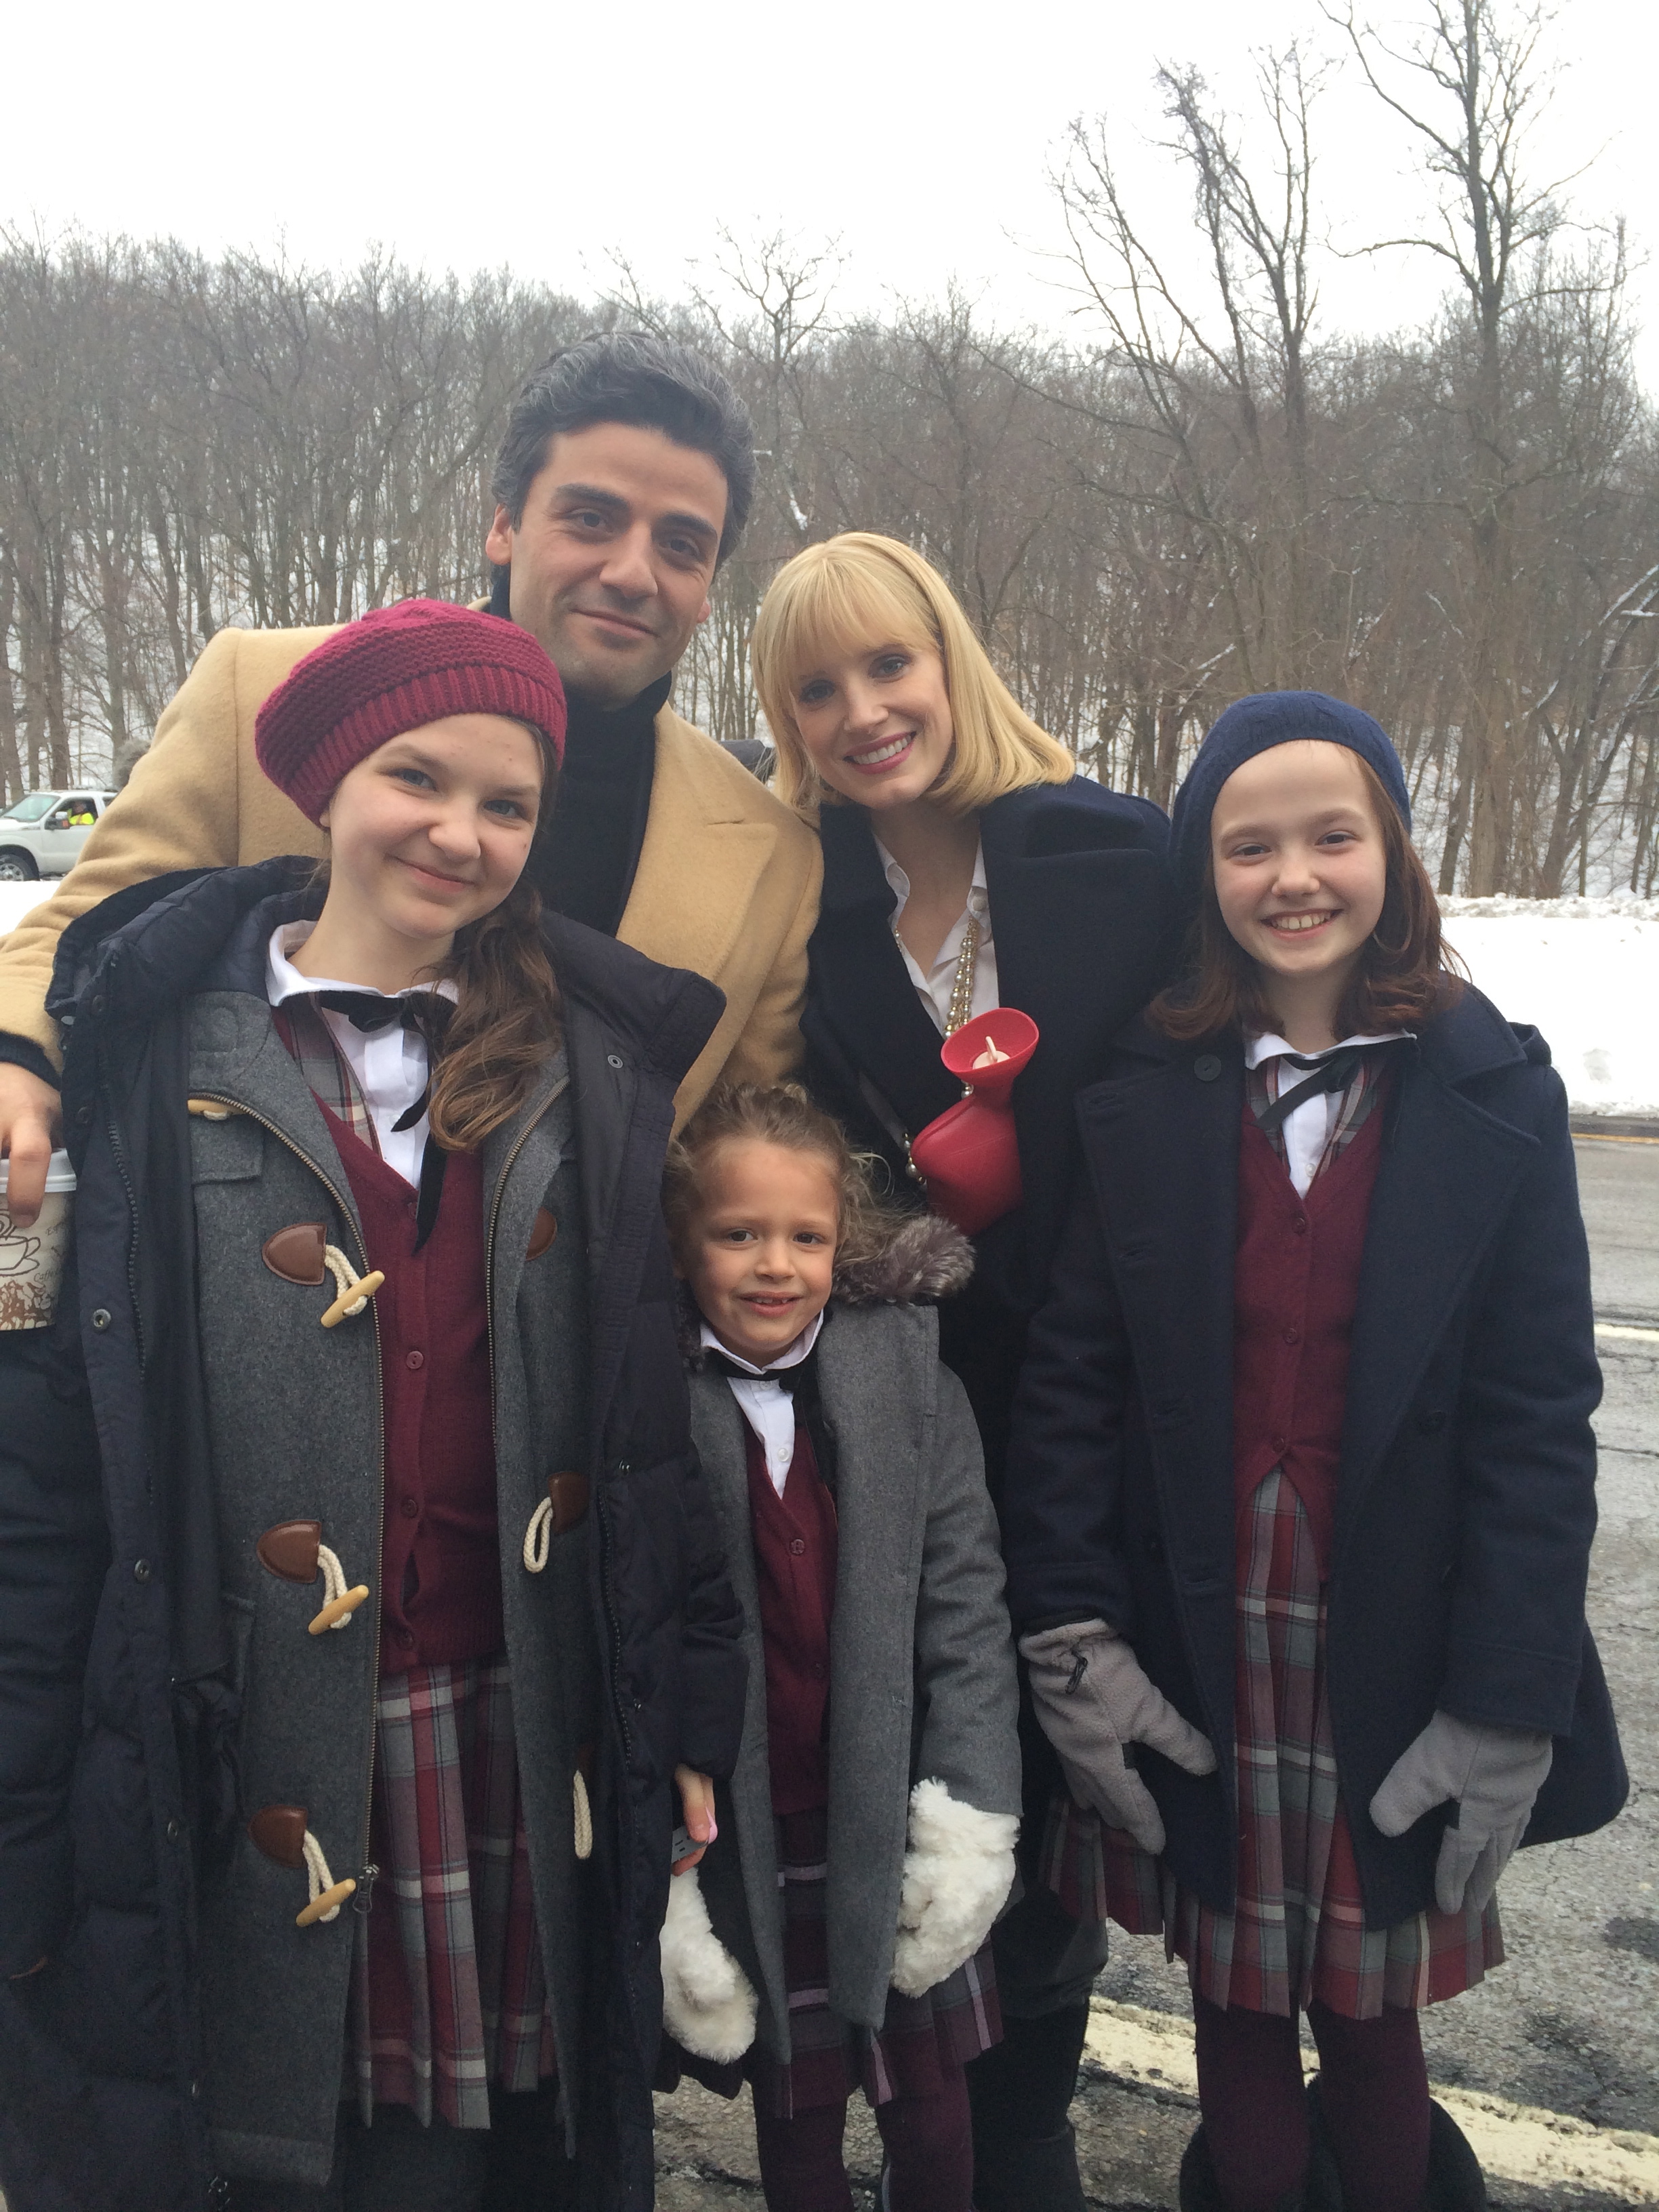 Morales Family - A MOST VIOLENT YEAR Oscar Isaac, Jessica Chastain, Daisy Tahan, Giselle Eisenberg, Taylor Richardson